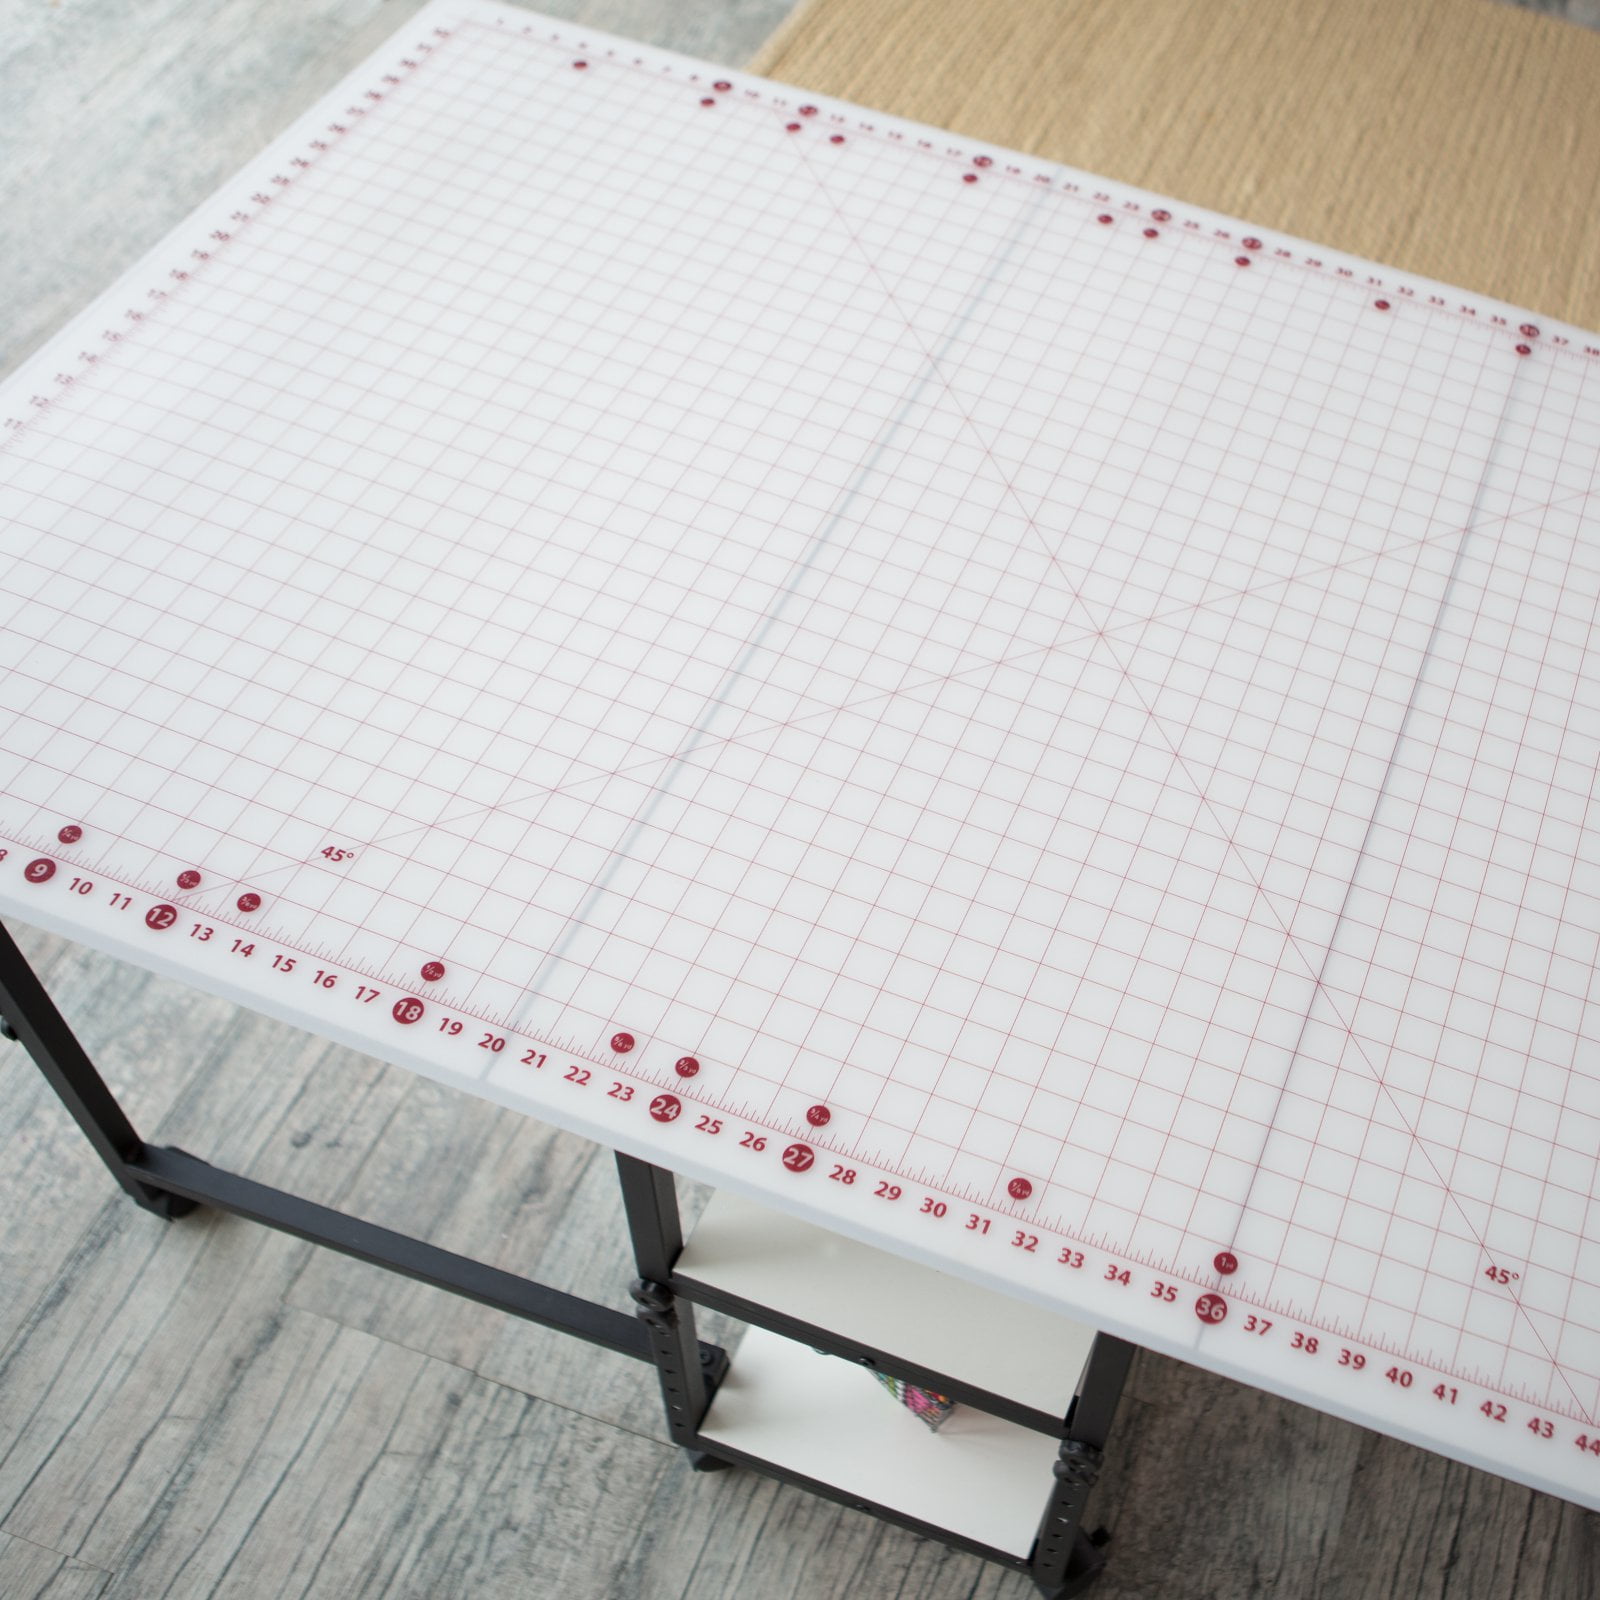 X Large Cutting Mat for Sewing Craft Table - 36x59 inches